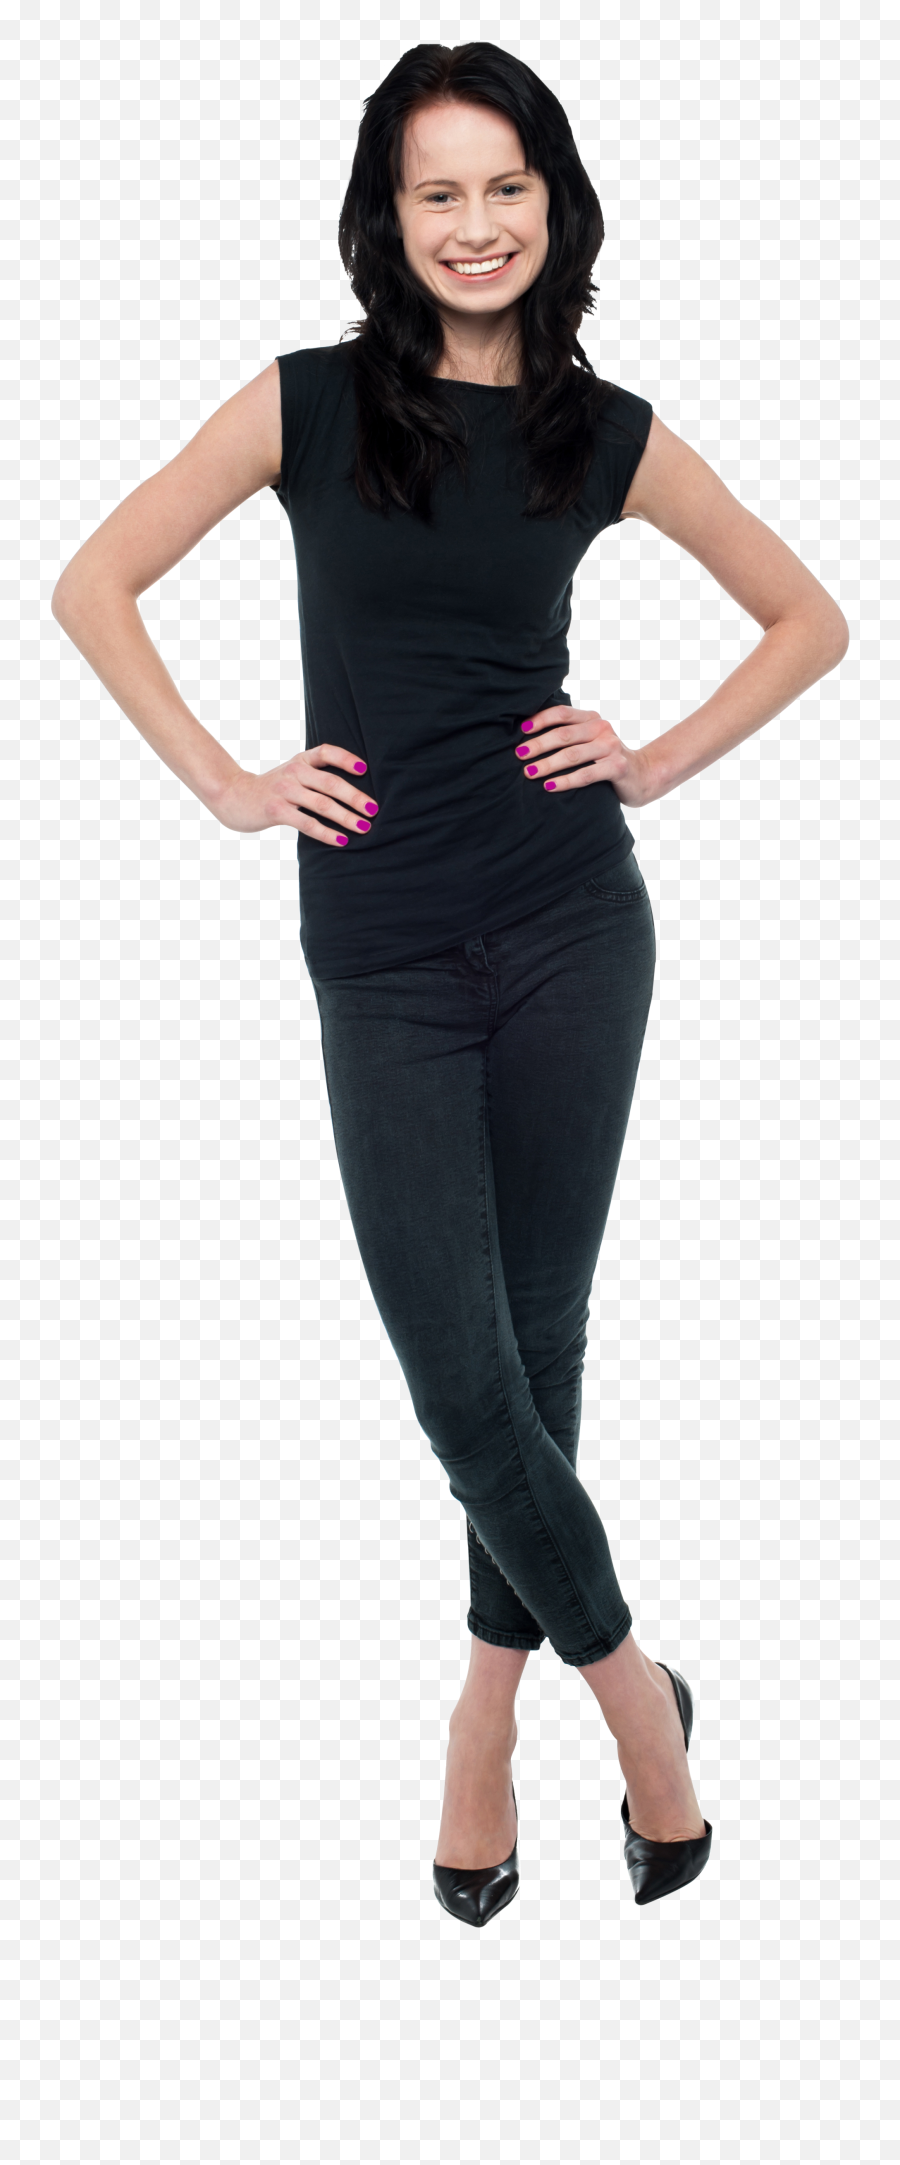 Standing Girl PNG Image for Free Download